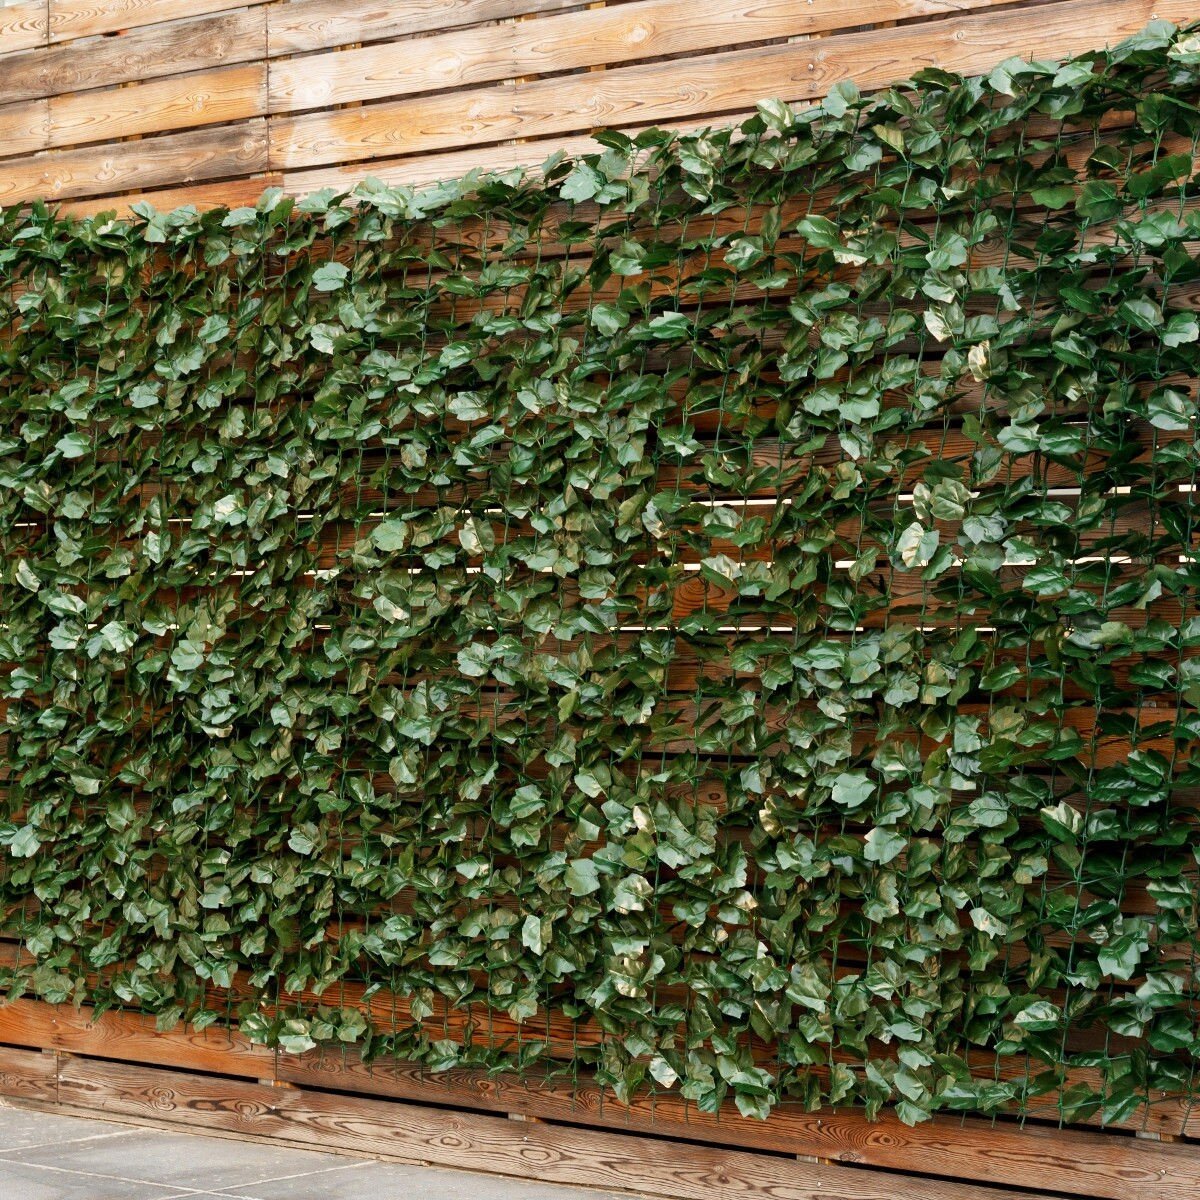 Artificial Fake Ivy Leaf Foliage Privacy Fence Screen Garden Panel Outdoor Hedge 